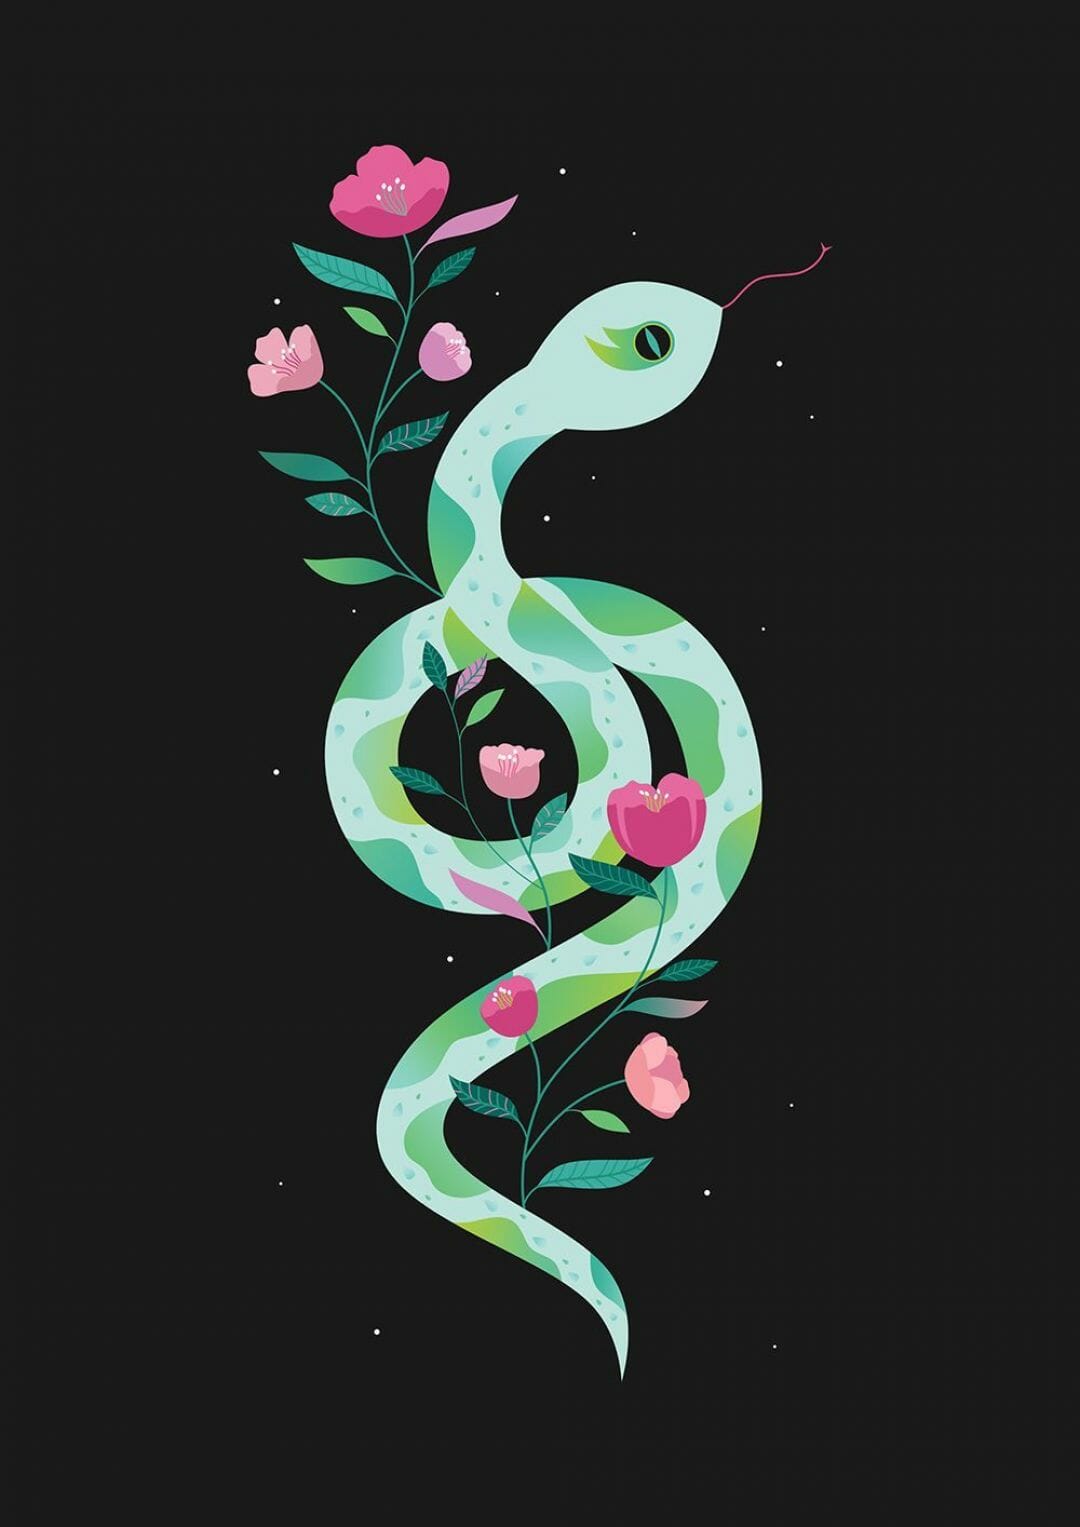 A snake wrapped around a flower stem with pink flowers - Snake